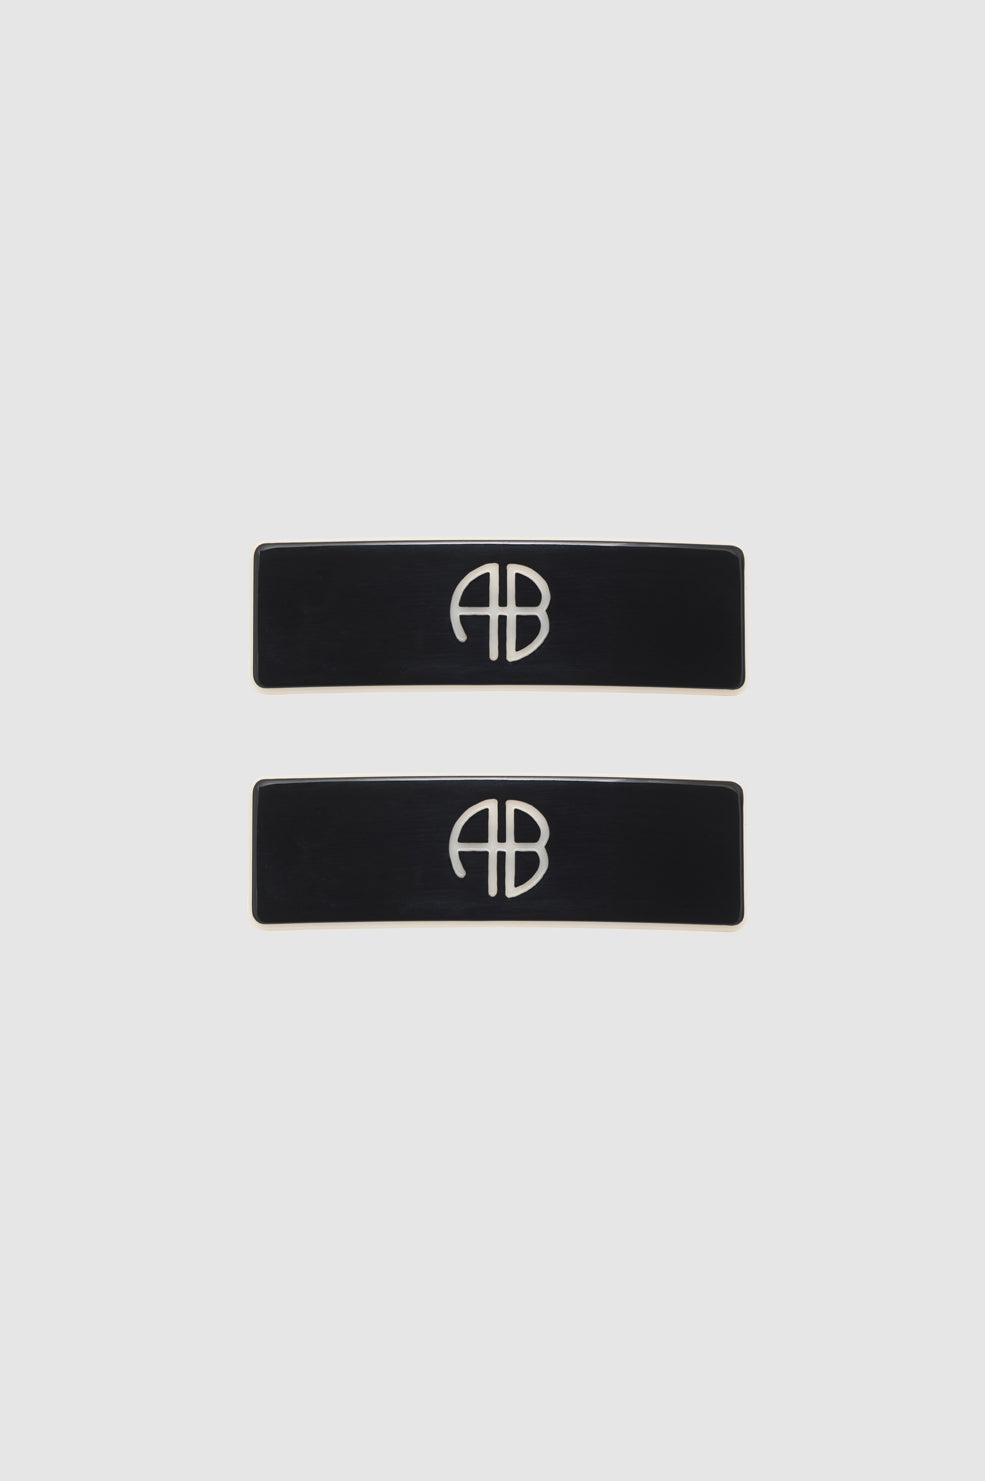 ANINE BING AB Hair Clip 2 Pack - Black - Front View Both